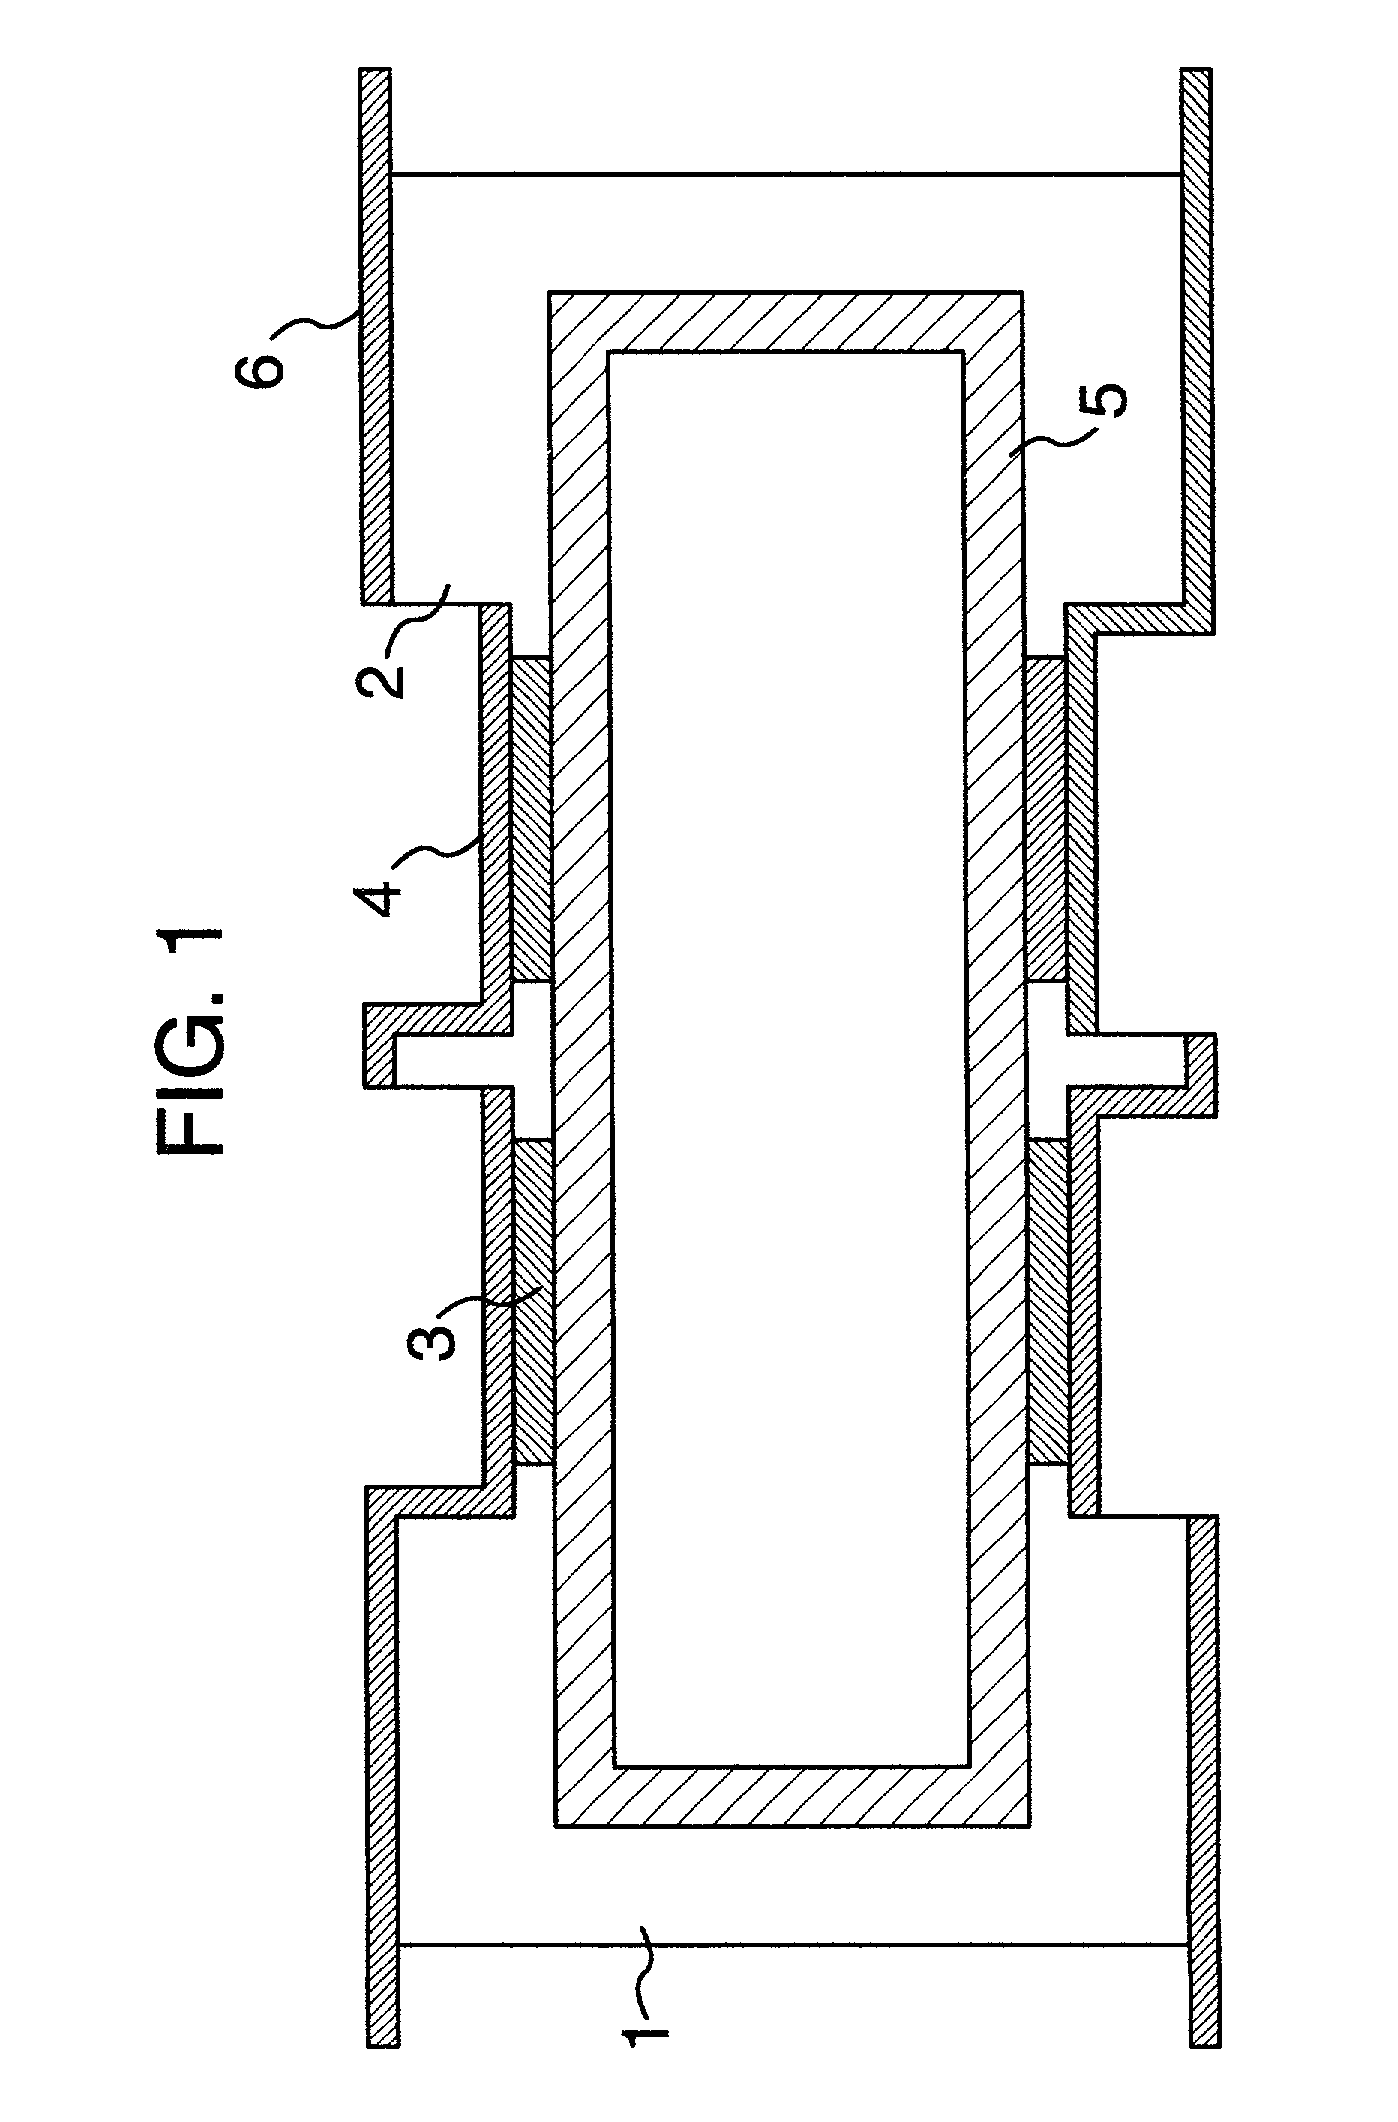 Fuel cell power generation equipment and a device using the same